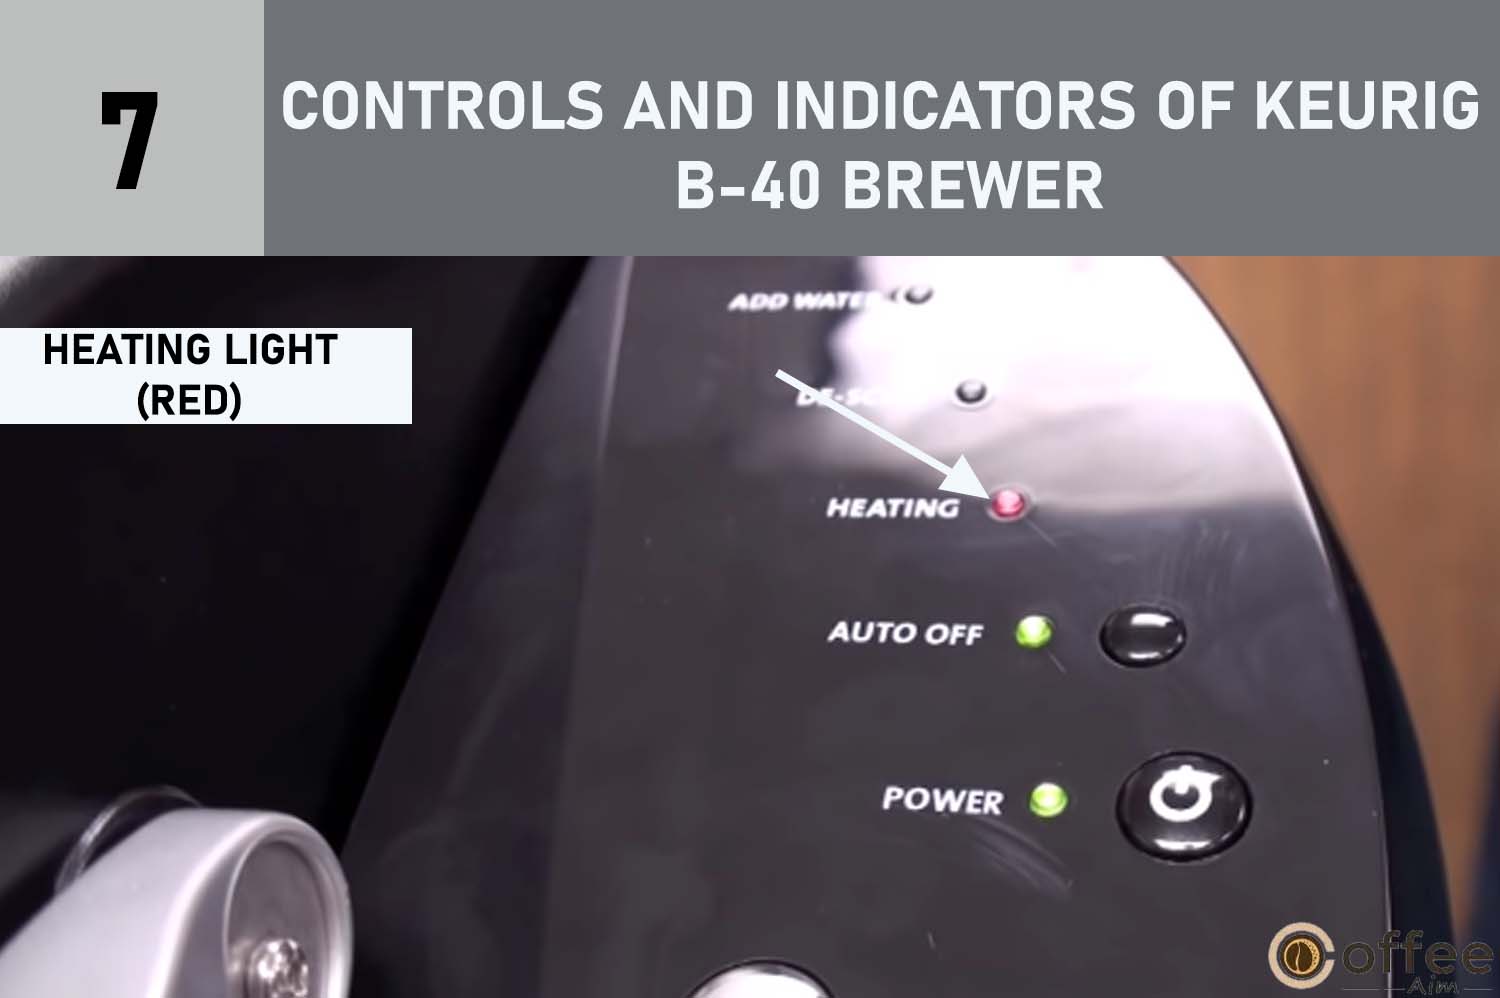 The vivid image encapsulates the "Heating Light (Red)" within the comprehensive guide titled "Controls and Indicators of Keurig B-40 Brewer" for the informative article "How to Use Keurig B-40